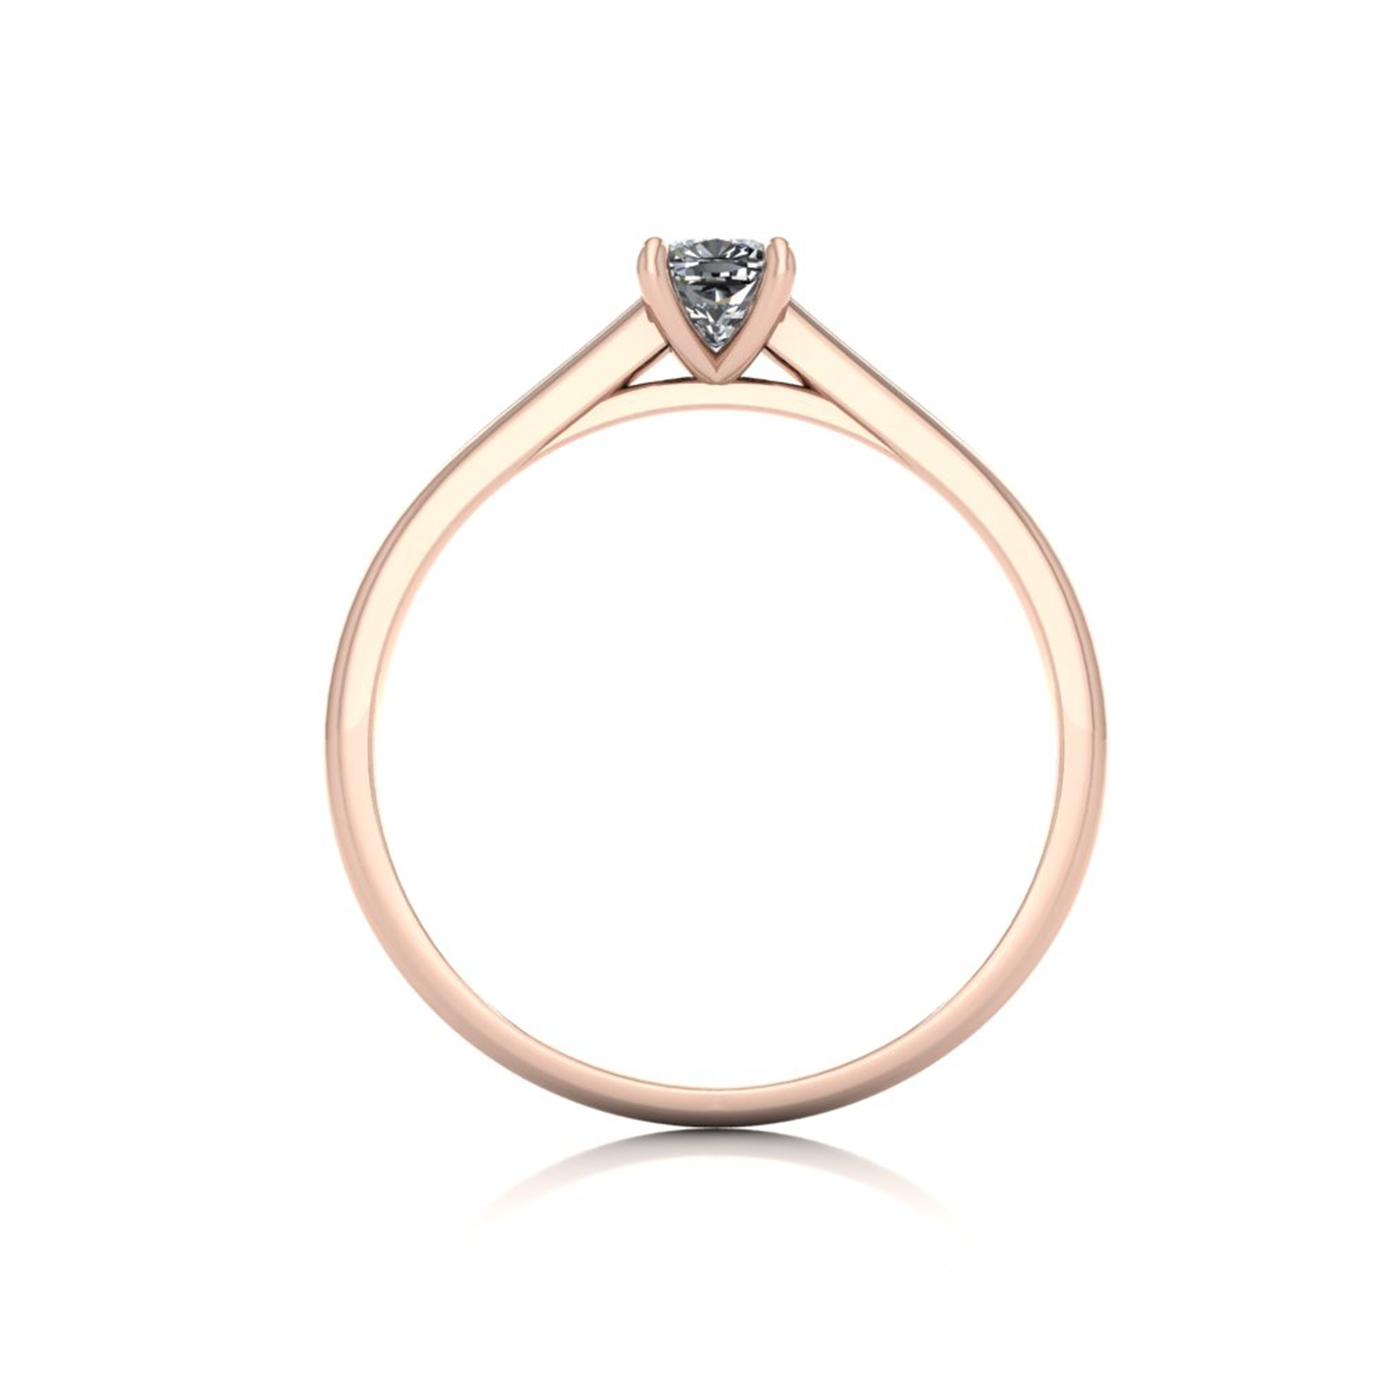 18k rose gold  0,30 ct 4 prongs solitaire cushion cut diamond engagement ring with whisper thin band